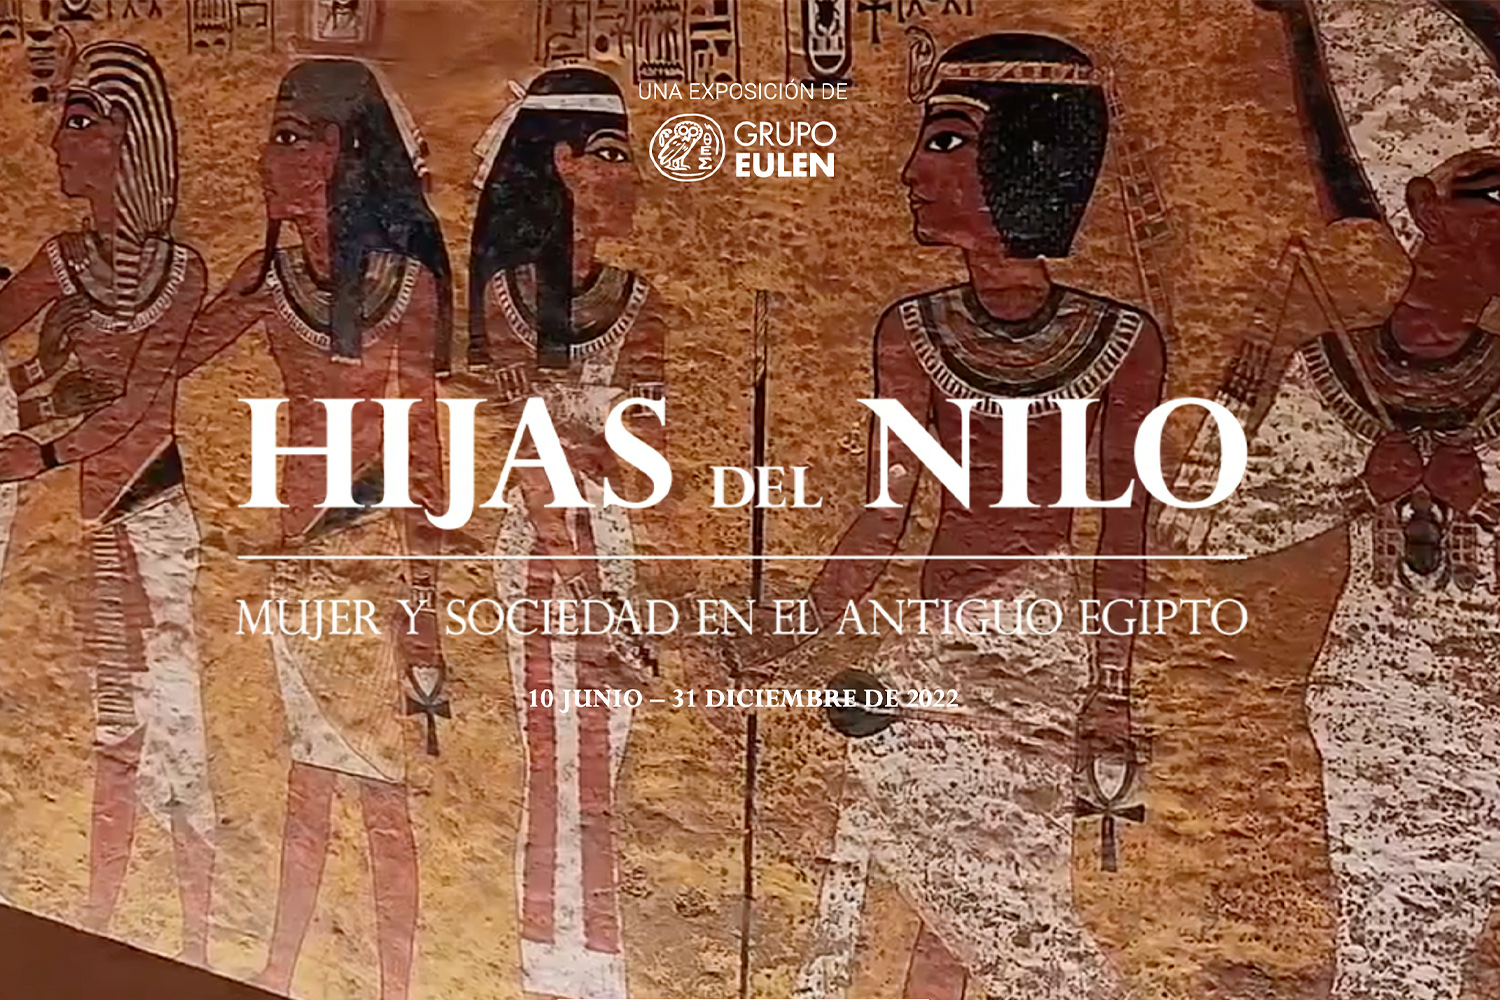 "Daughters of the Nile. Women and society in ancient Egypt